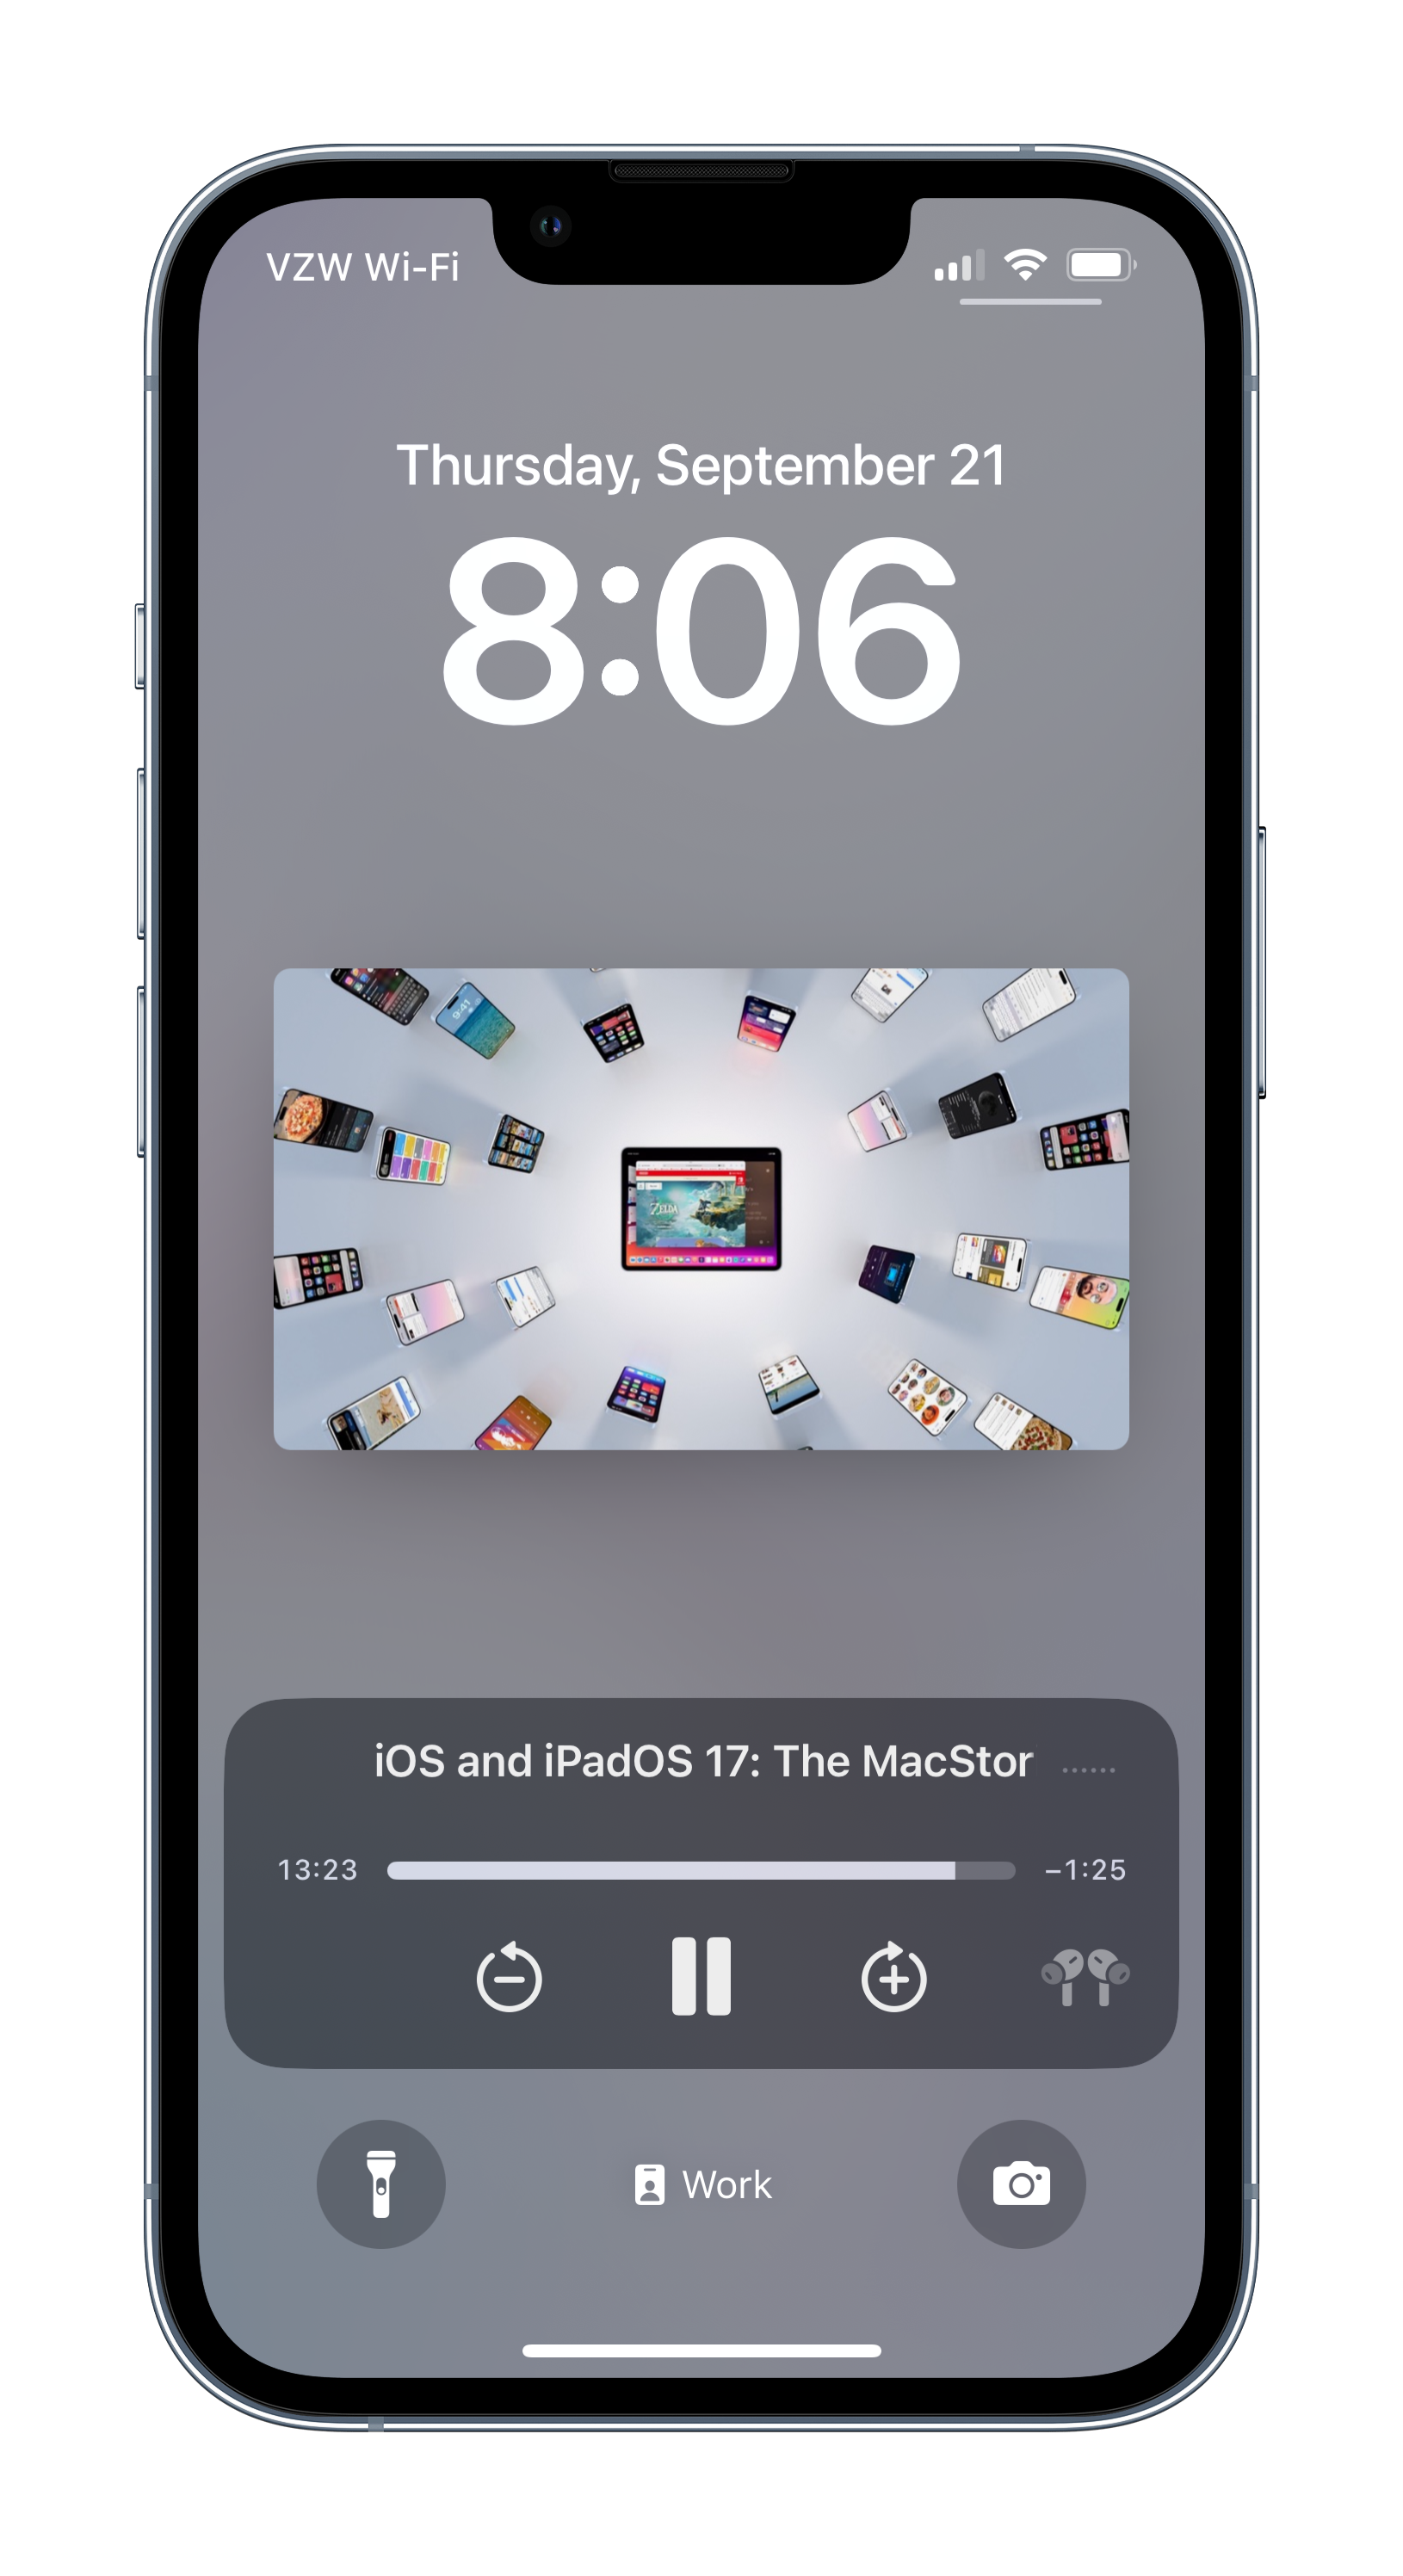 iPhone Lock Screen with Media Player